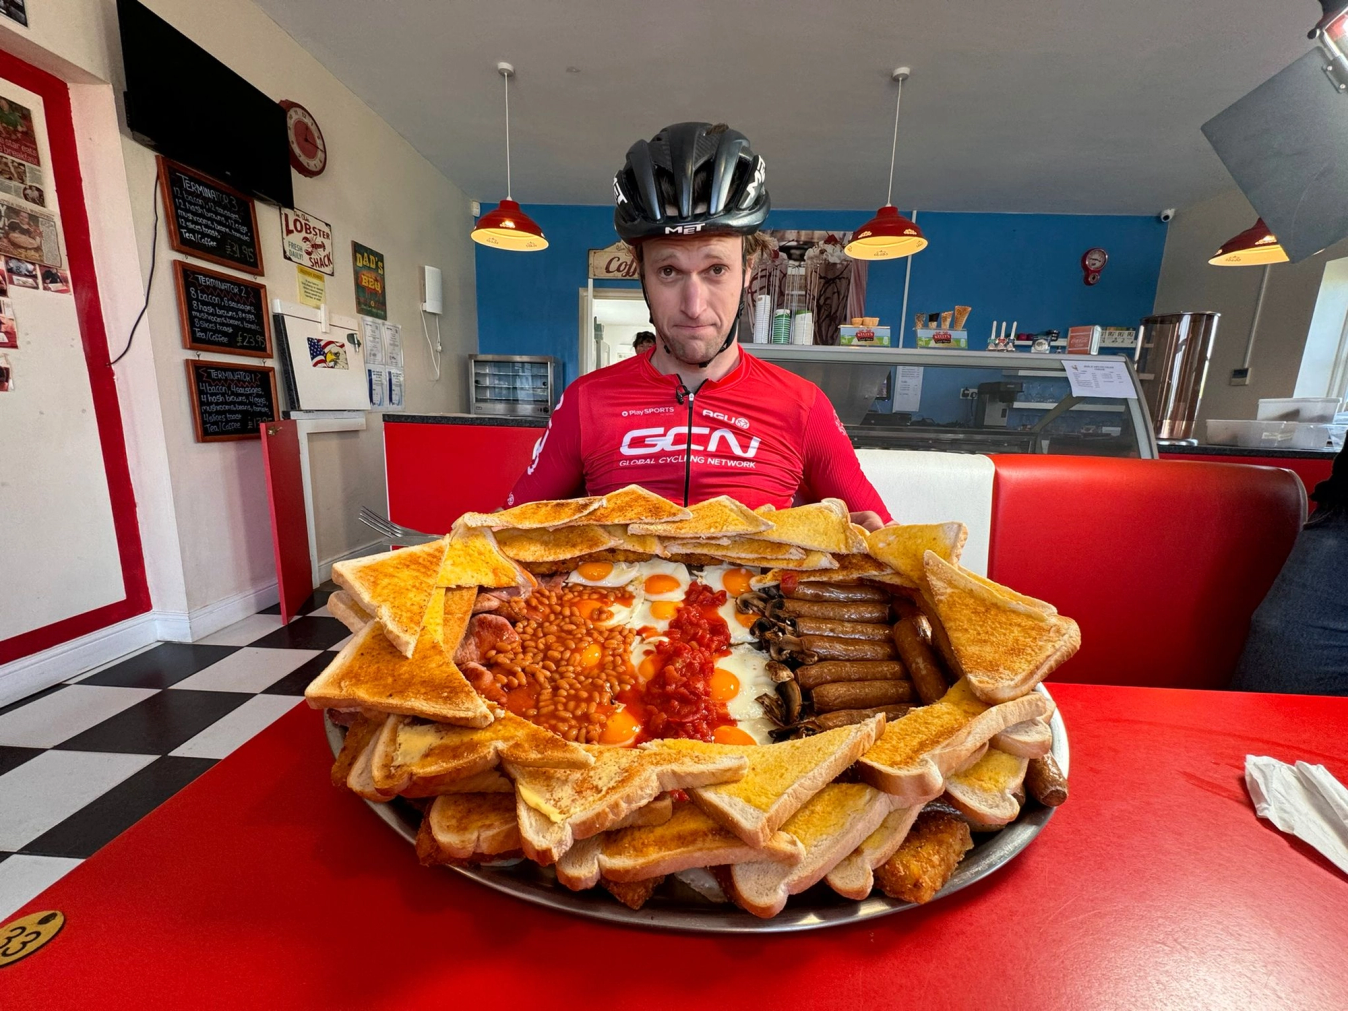 This is the Terminator Armageddon breakfast, the biggest breakfast in the world. And Conor Dunne is about to eat it and then ride his bike